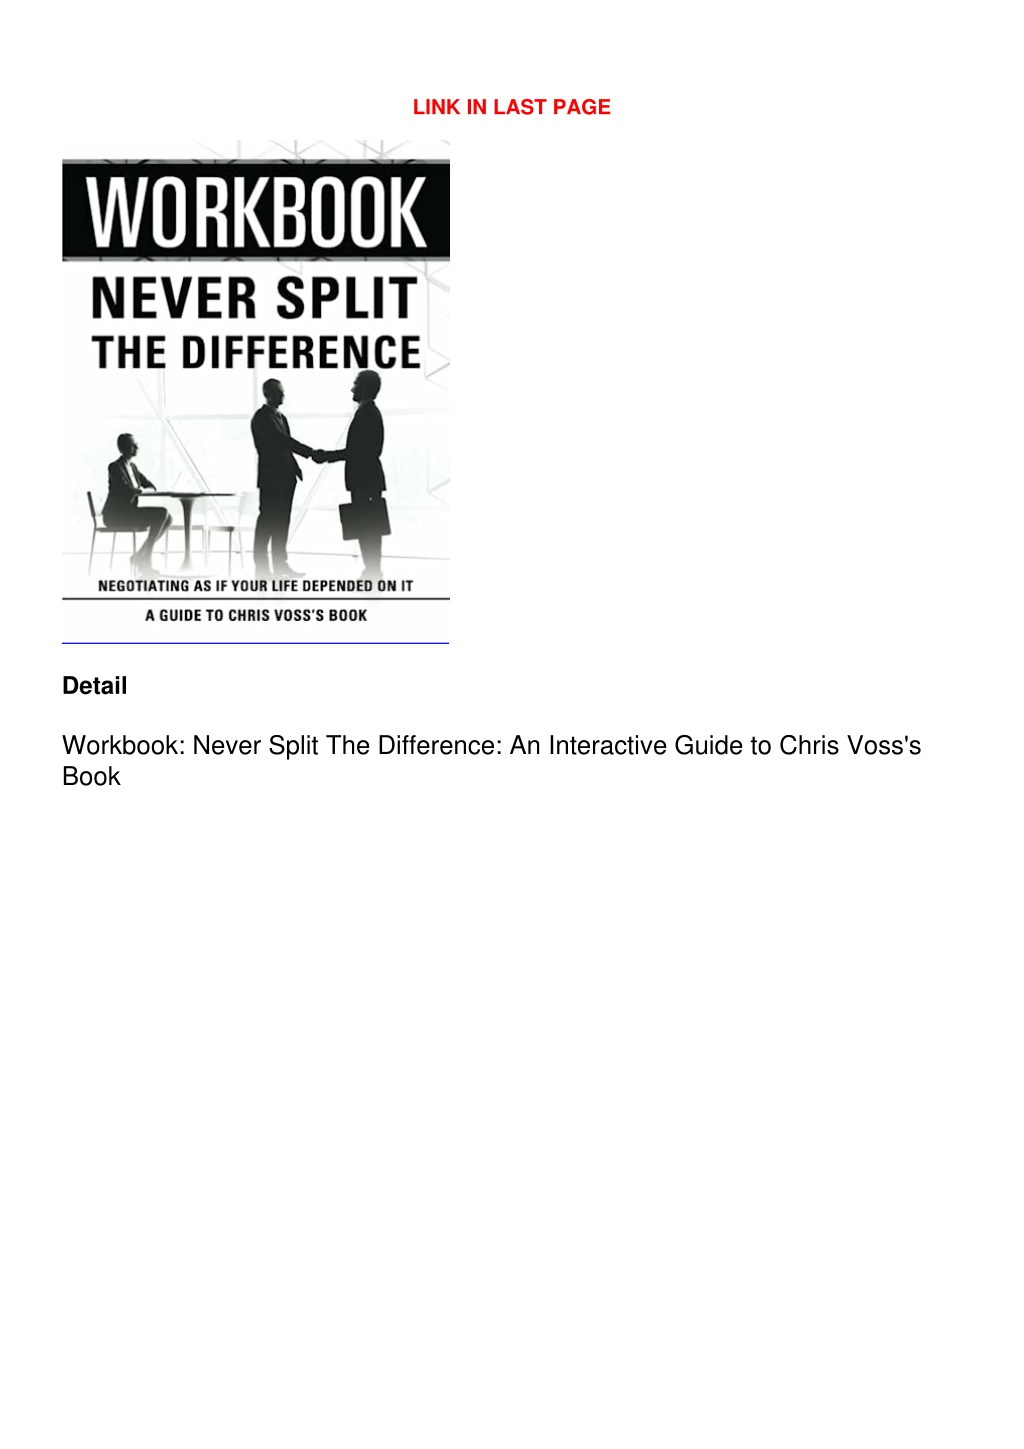 Workbook: Never Split The Difference: An Interactive Guide to